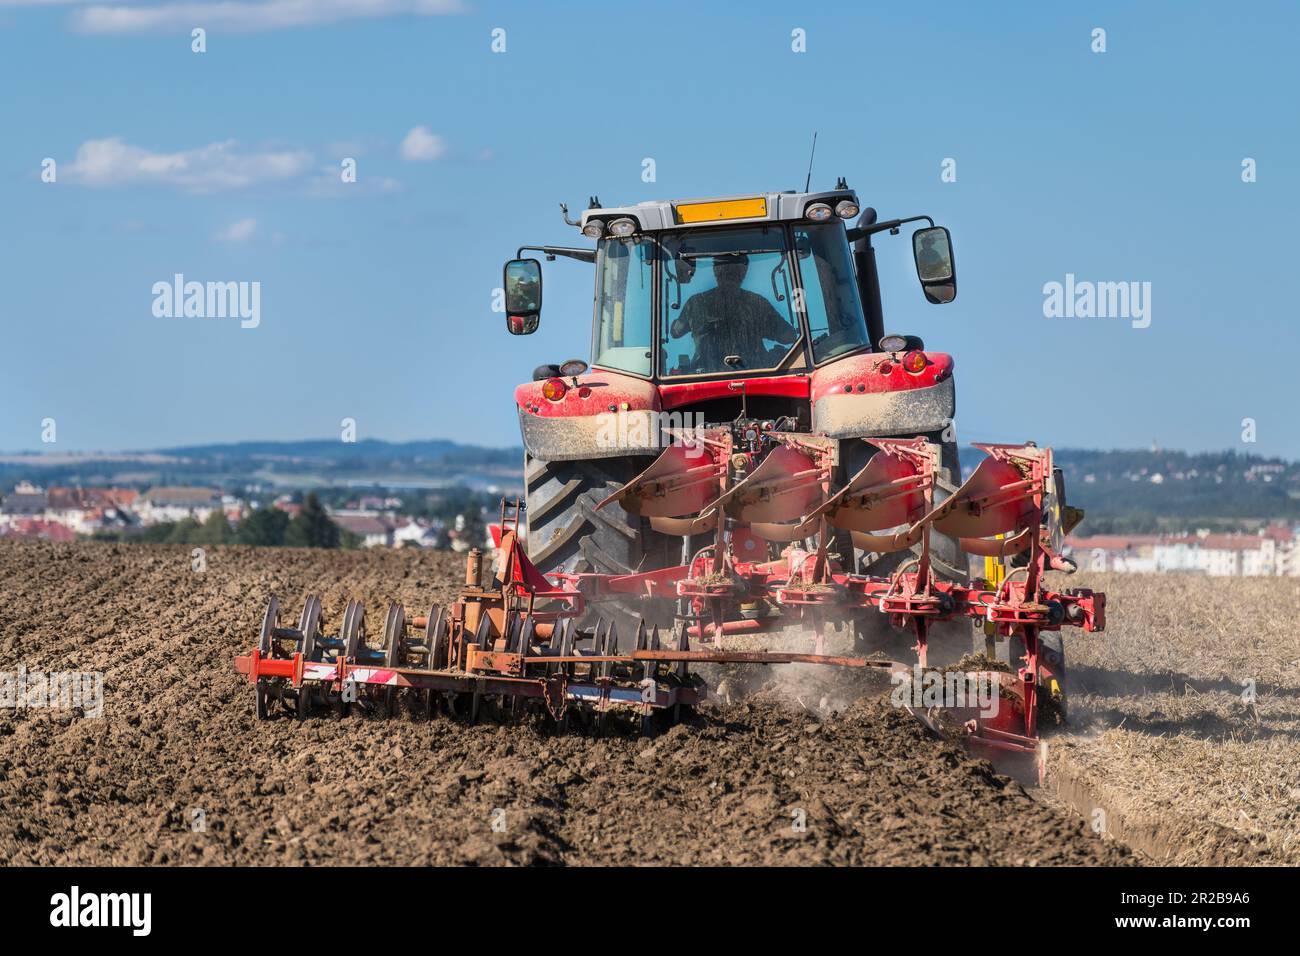 Red tractor on field at plowing and harrowing farm land soil in summer nature under blue sky. Working farmer in agricultural vehicle at earth tillage. Stock Photo